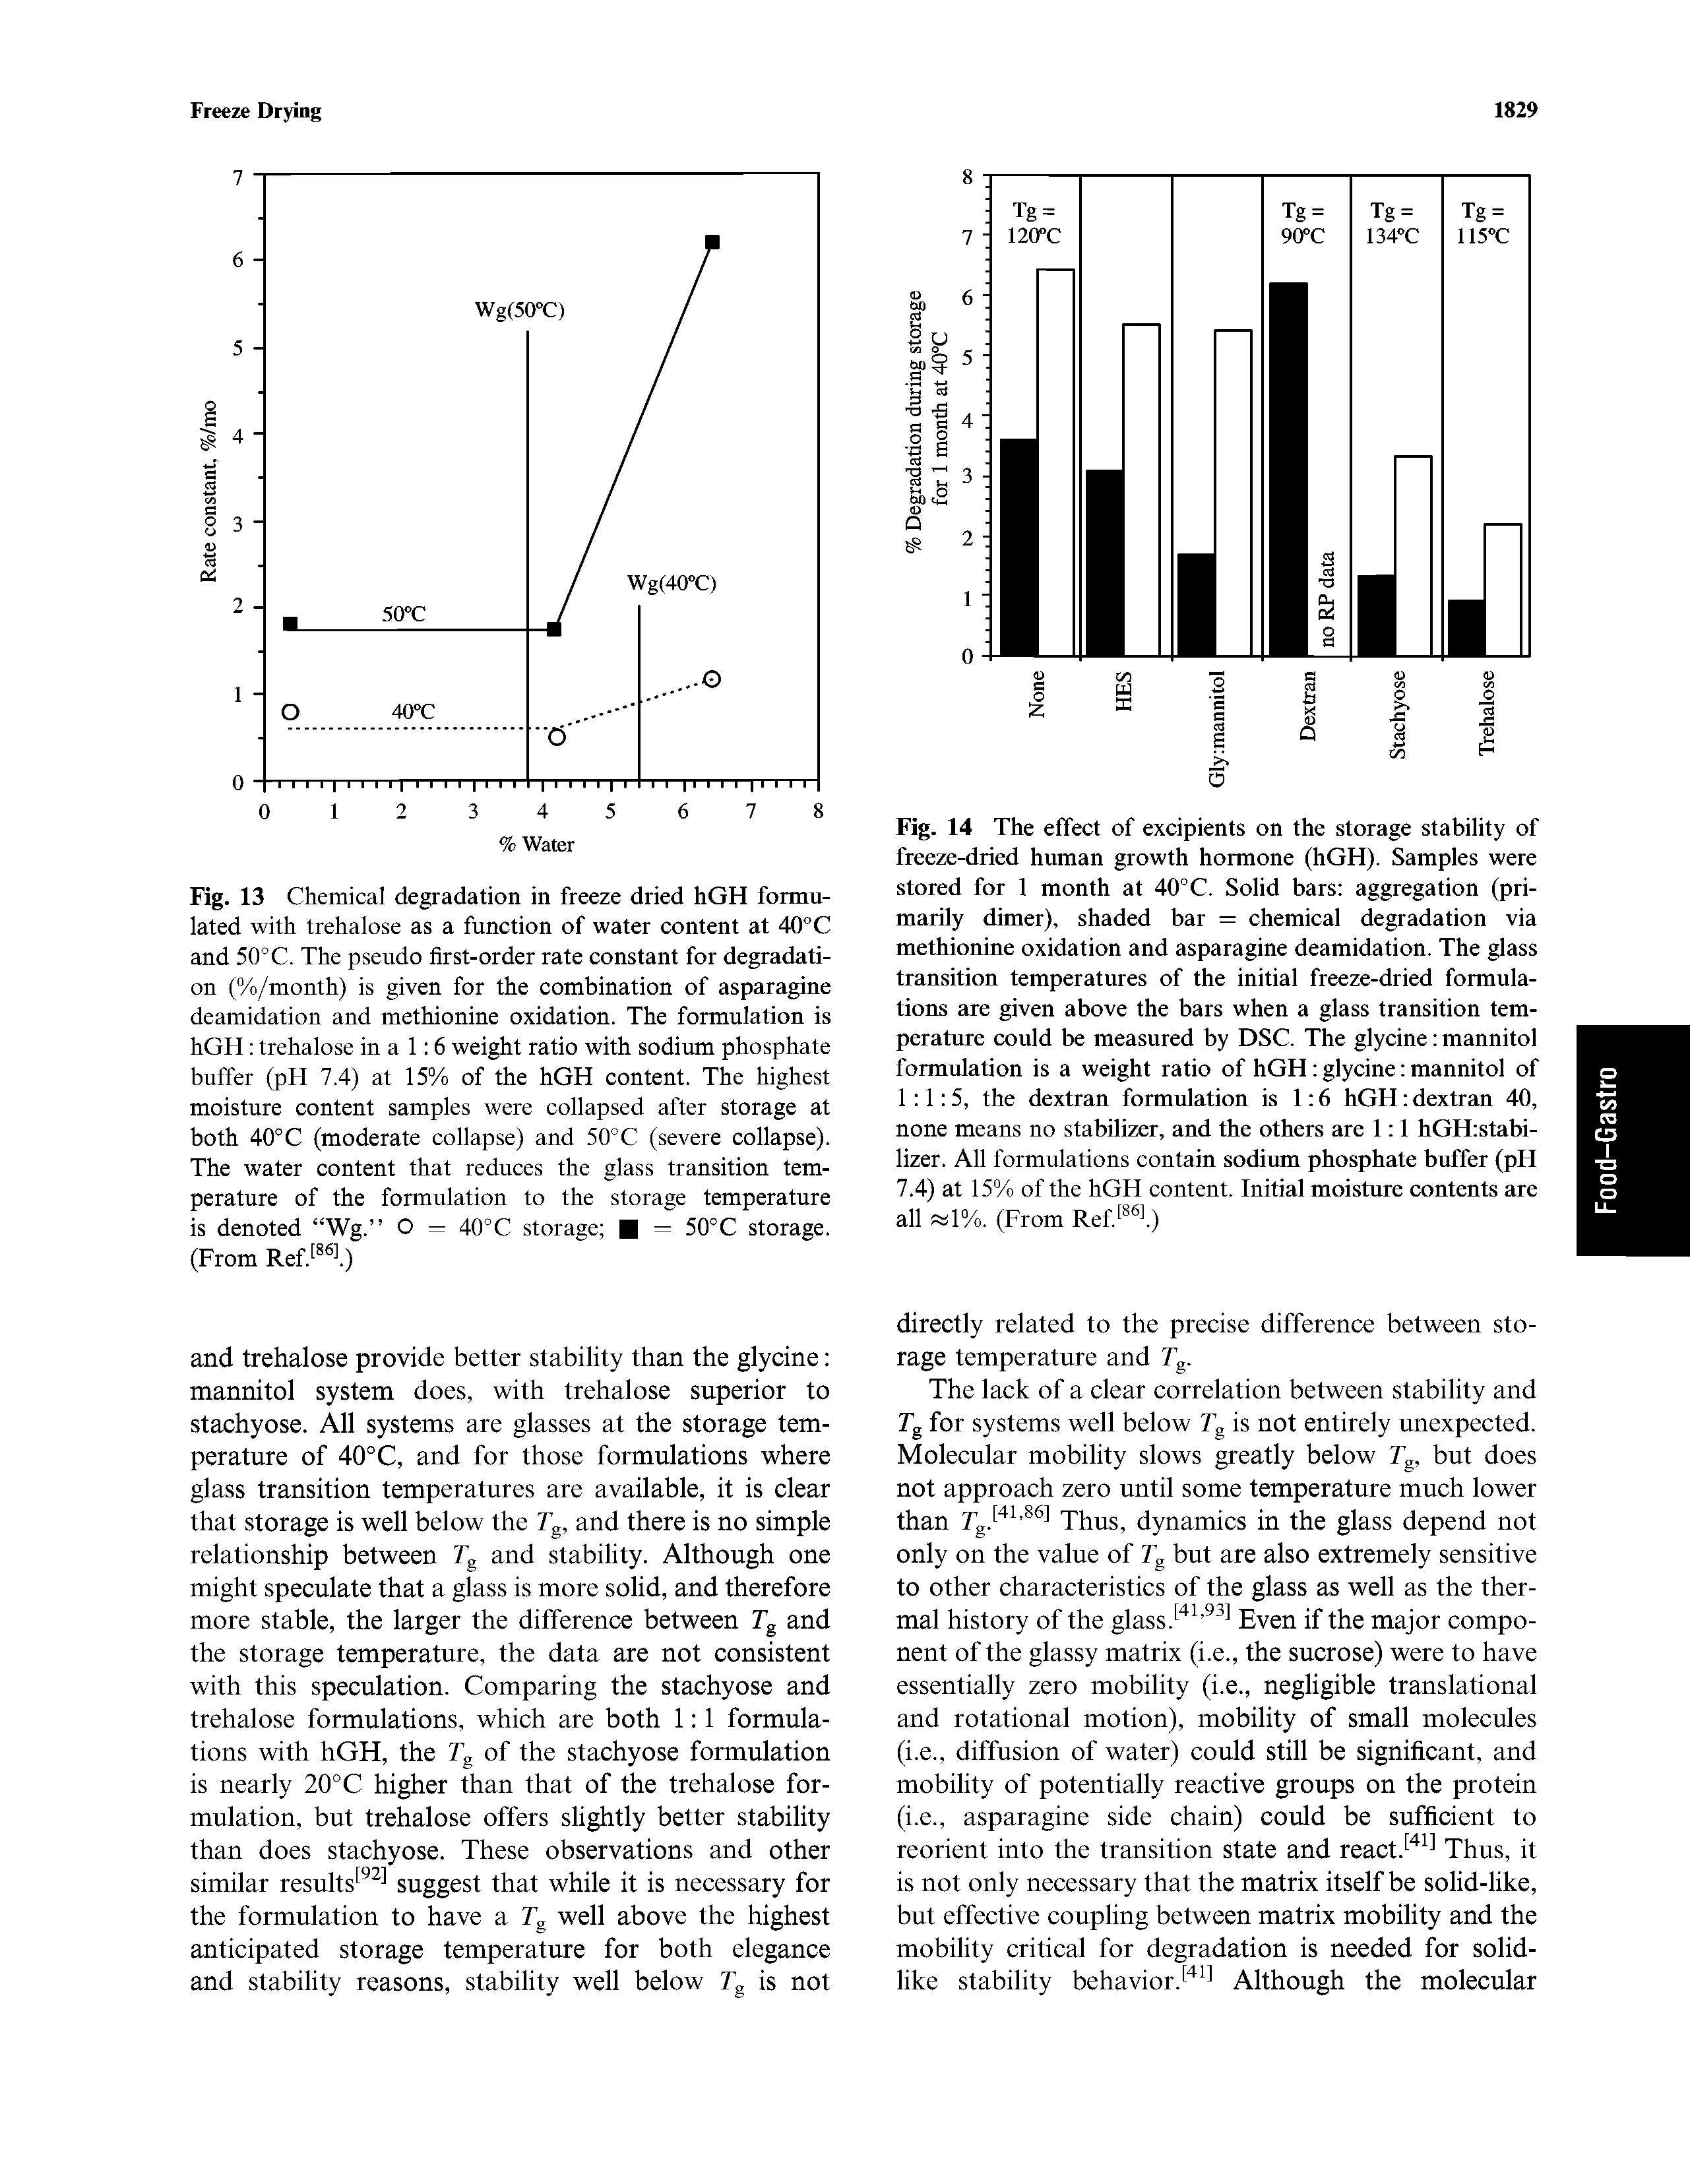 Fig. 14 The effect of excipients on the storage stability of freeze-dried human growth hormone (hGH). Samples were stored for 1 month at 40°C. Solid bars aggregation (primarily dimer), shaded bar = chemical degradation via methionine oxidation and asparagine deamidation. The glass transition temperatures of the initial freeze-dried formulations are given above the bars when a glass transition temperature could be measured by DSC. The glycine mannitol formulation is a weight ratio of hGH glycine mannitol of 1 1 5, the dextran formulation is 1 6 hGH dextran 40, none means no stabilizer, and the others are 1 1 hGH stabi-lizer. All formulations contain sodium phosphate buffer (pH 7.4) at 15% of the hGH content. Initial moisture contents are all 1%. (From Ref l)...